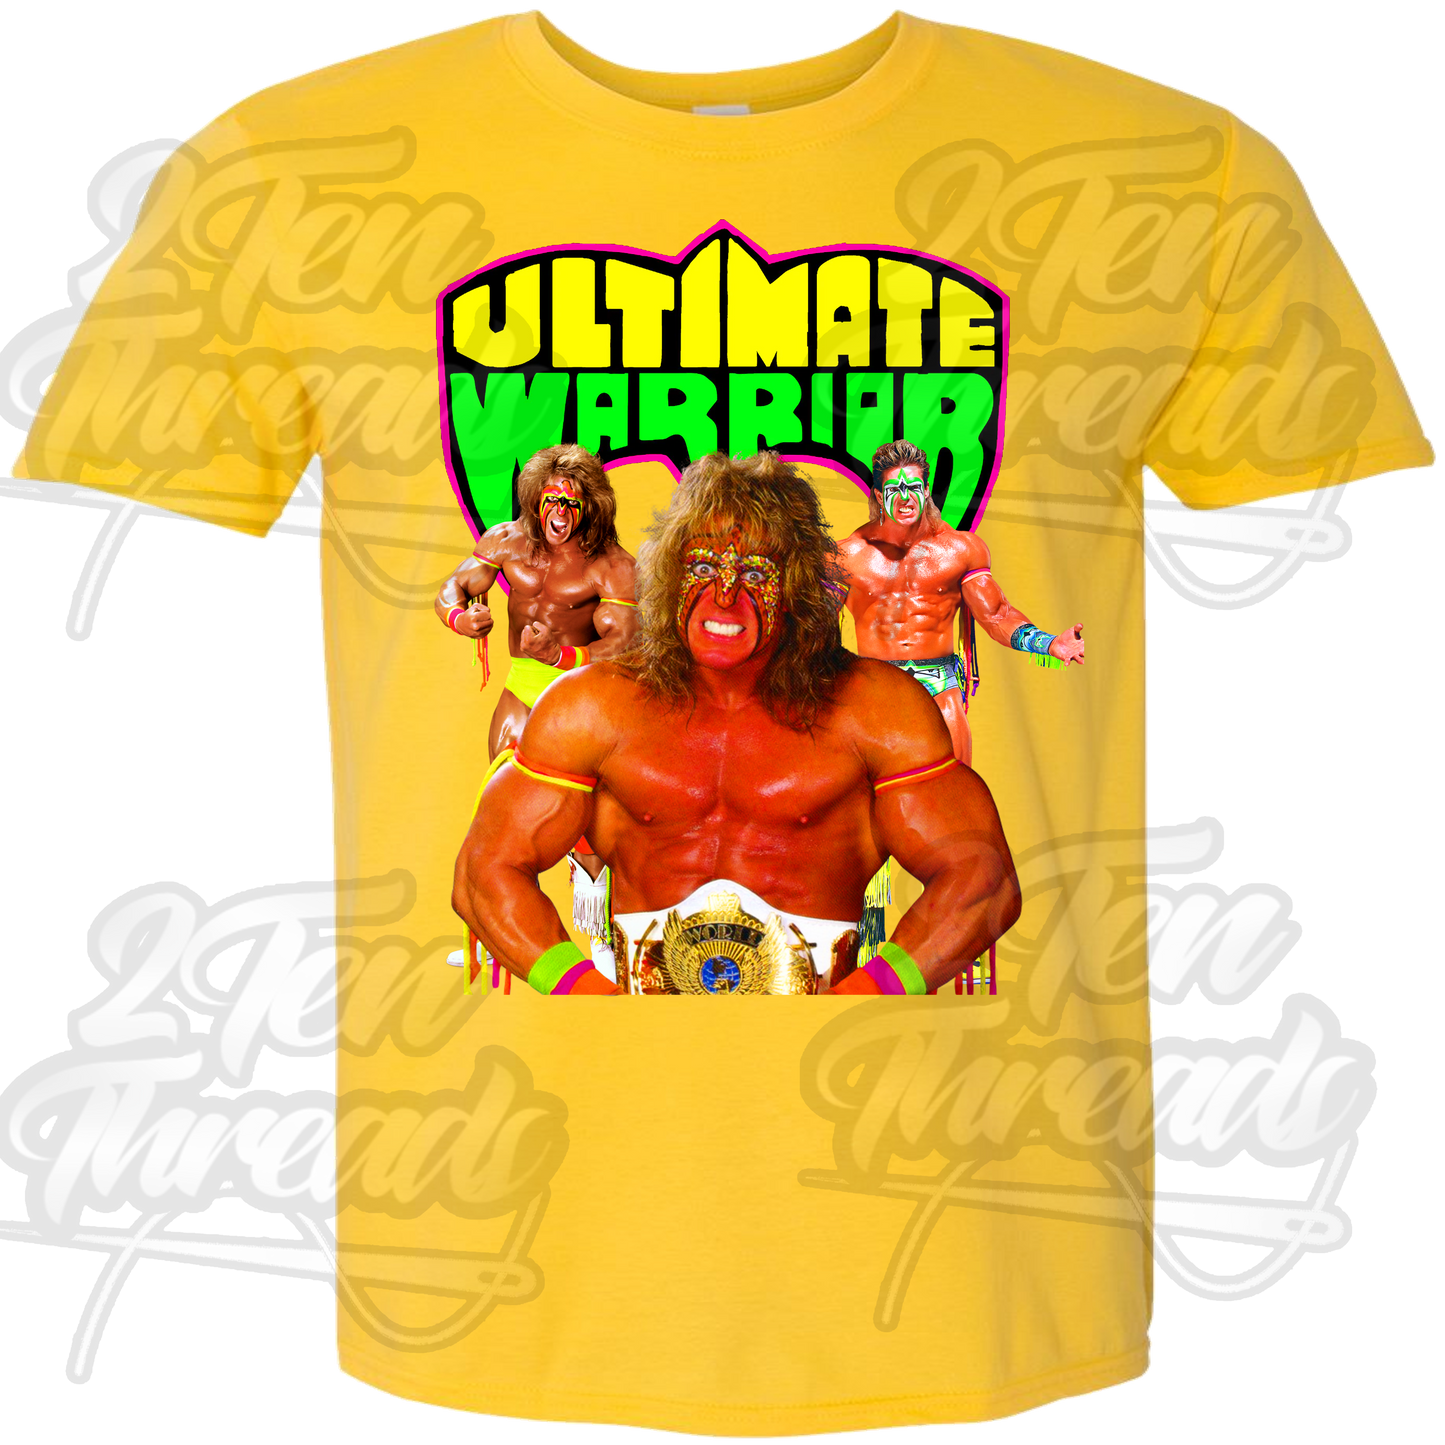 The Ultimate Warrior Shirt